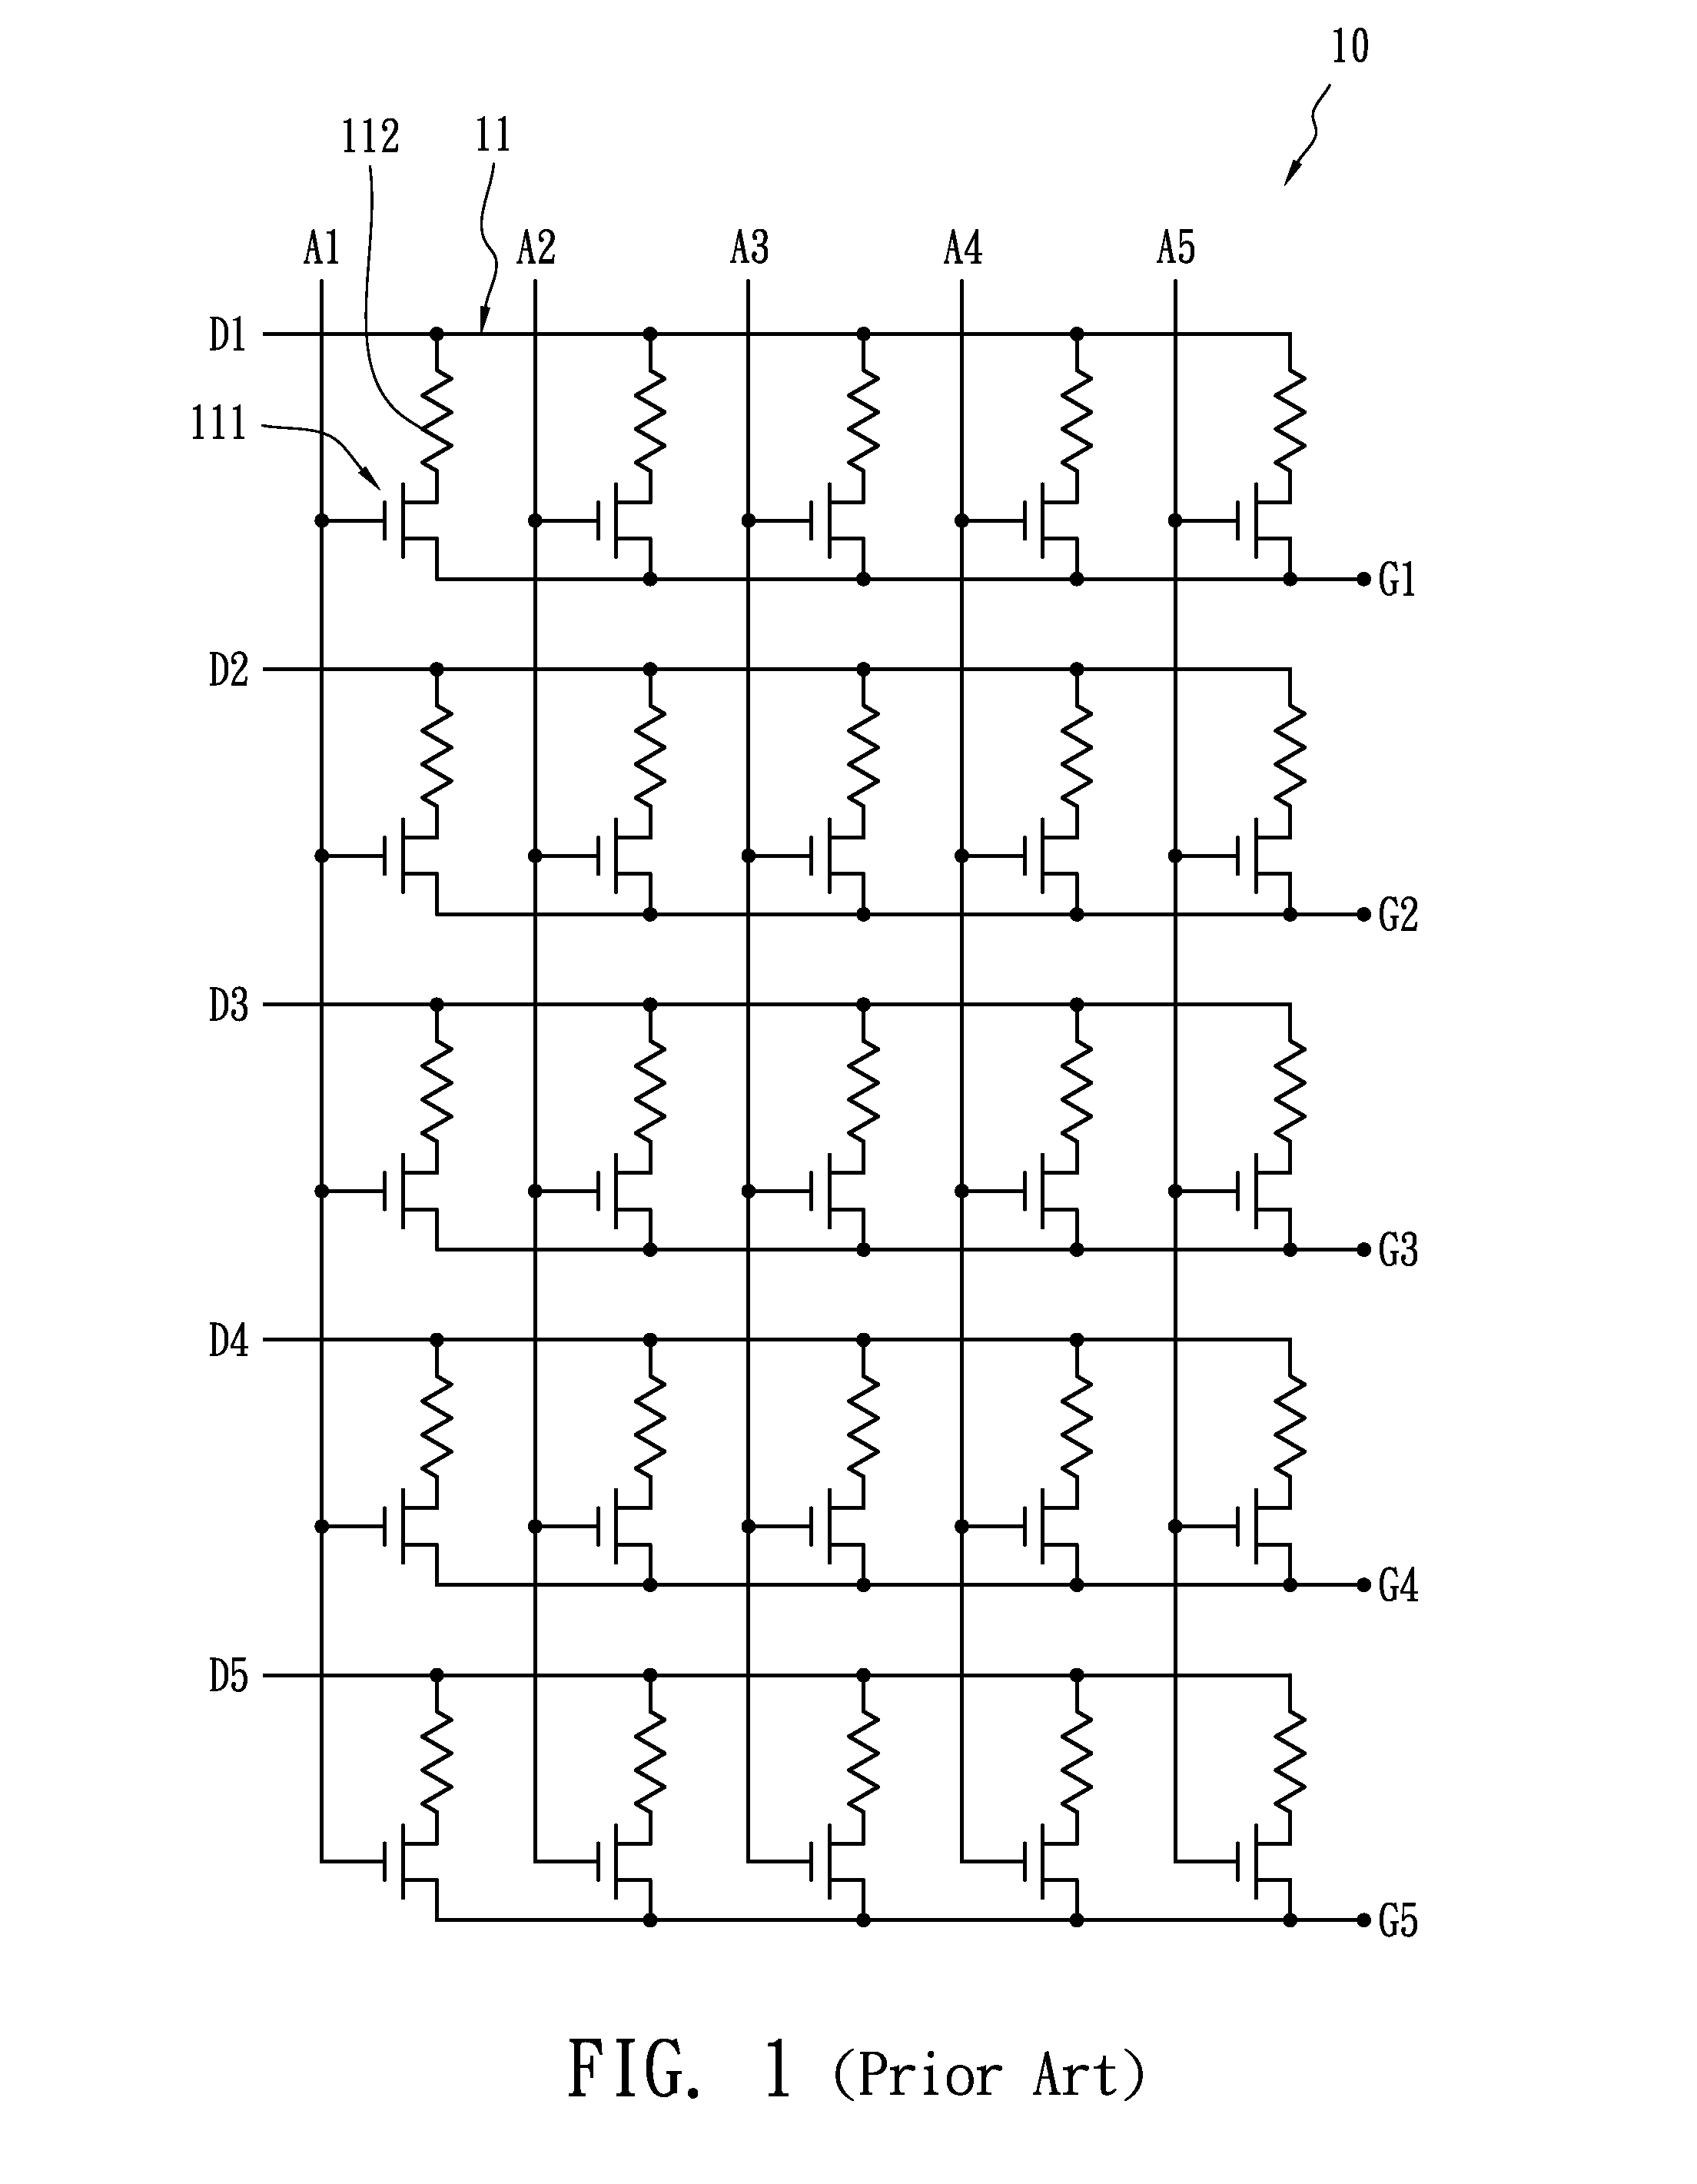 Multi-dimensional data registration integrated circuit for driving array-arrangement devices